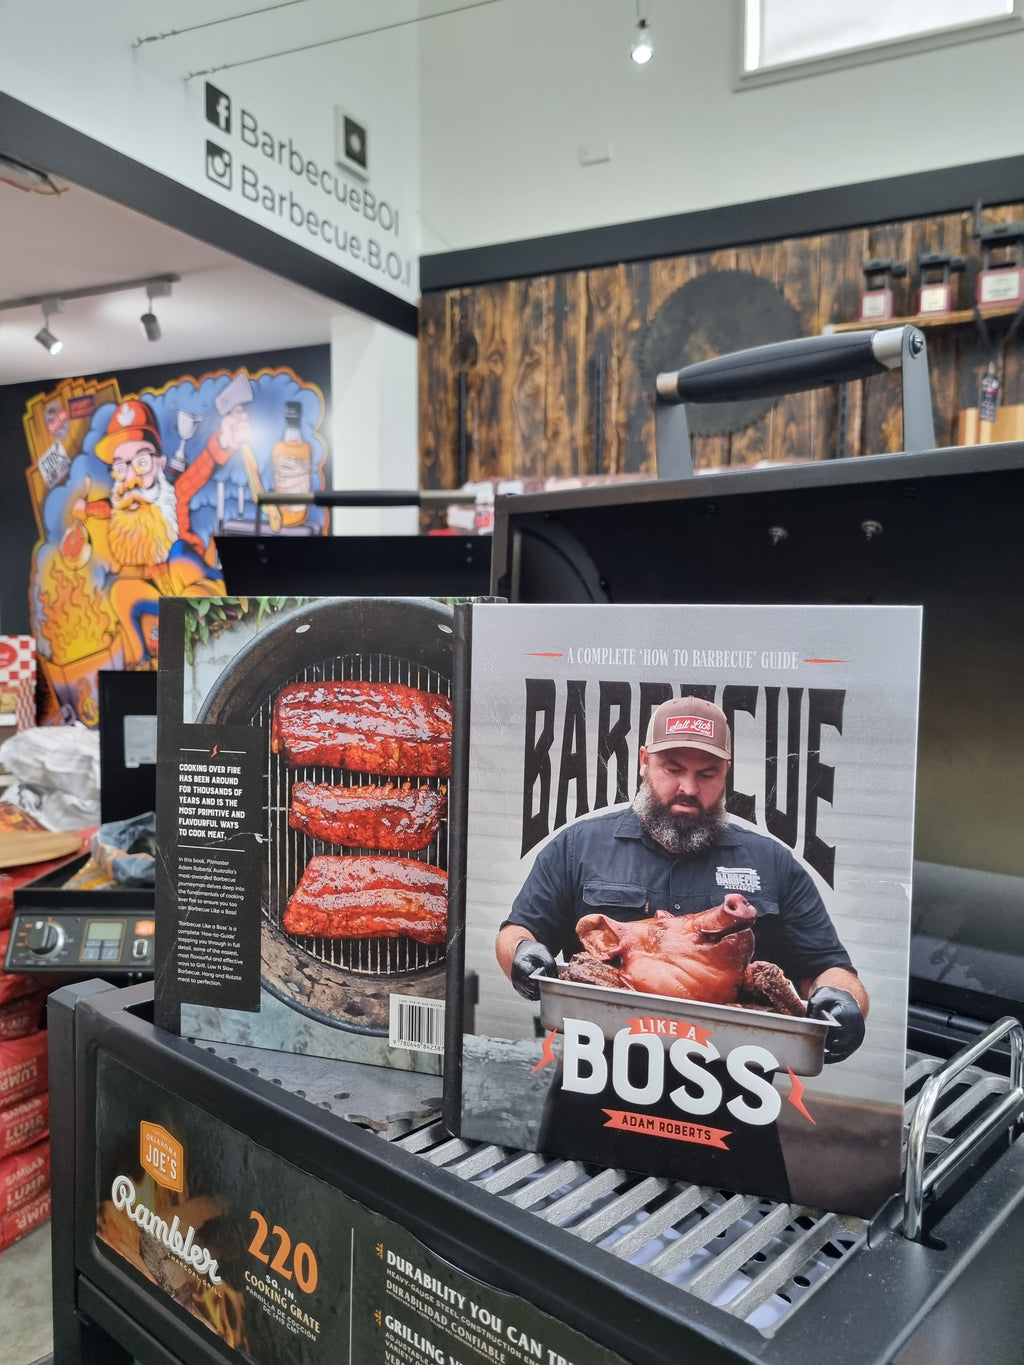 Barbecue Like A Boss Cook Book by Pit Master Adam Roberts